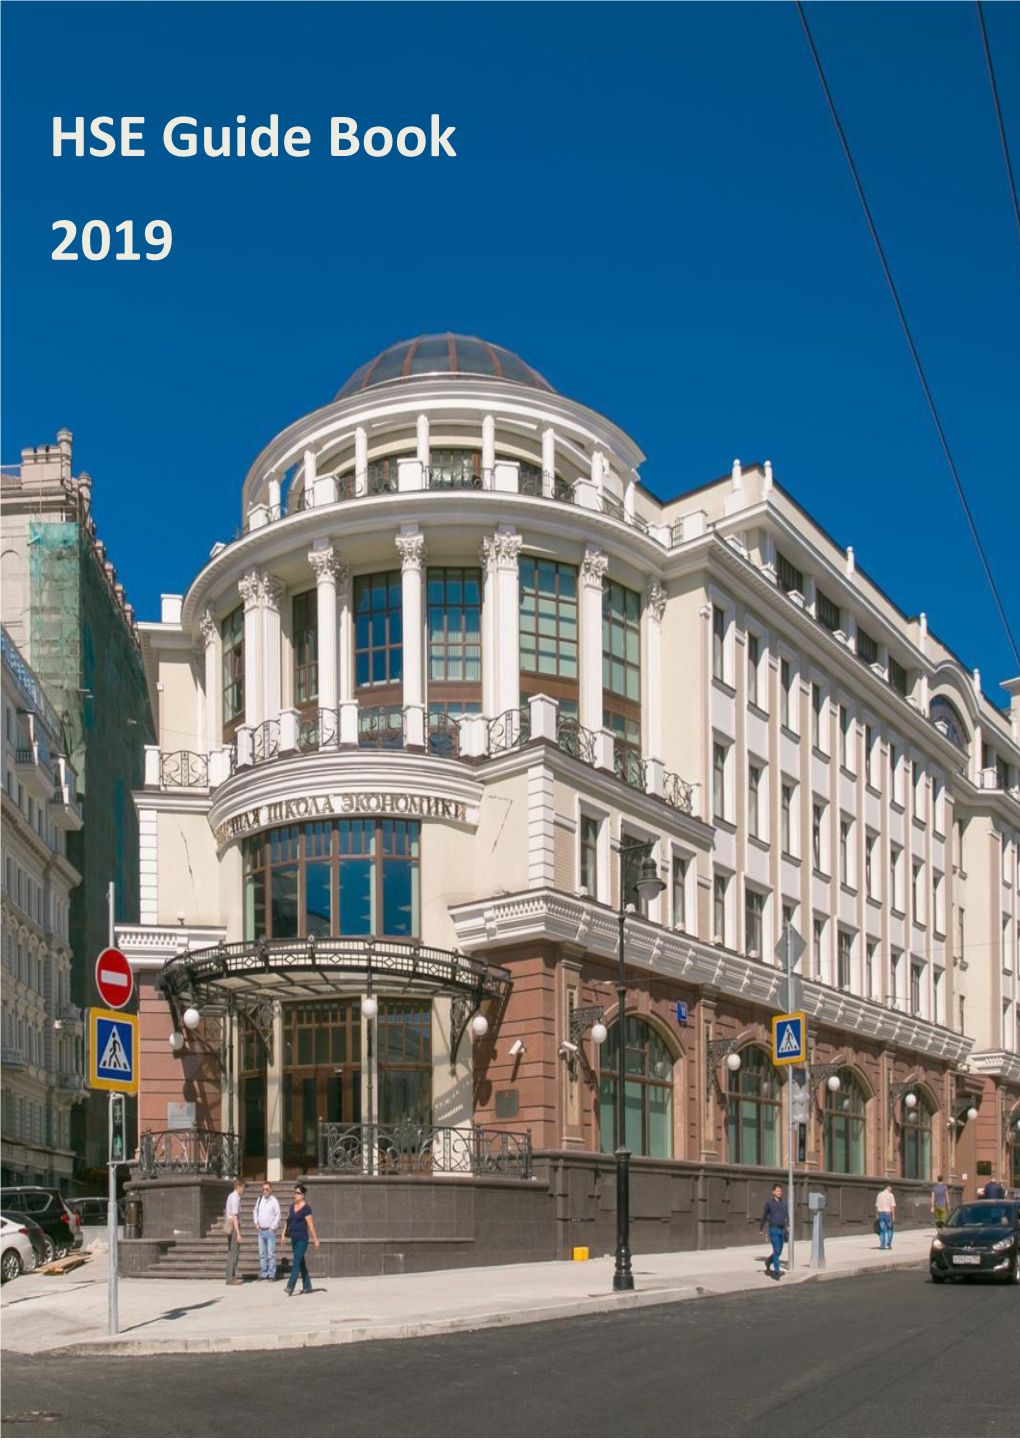 HSE Guide Book 2019